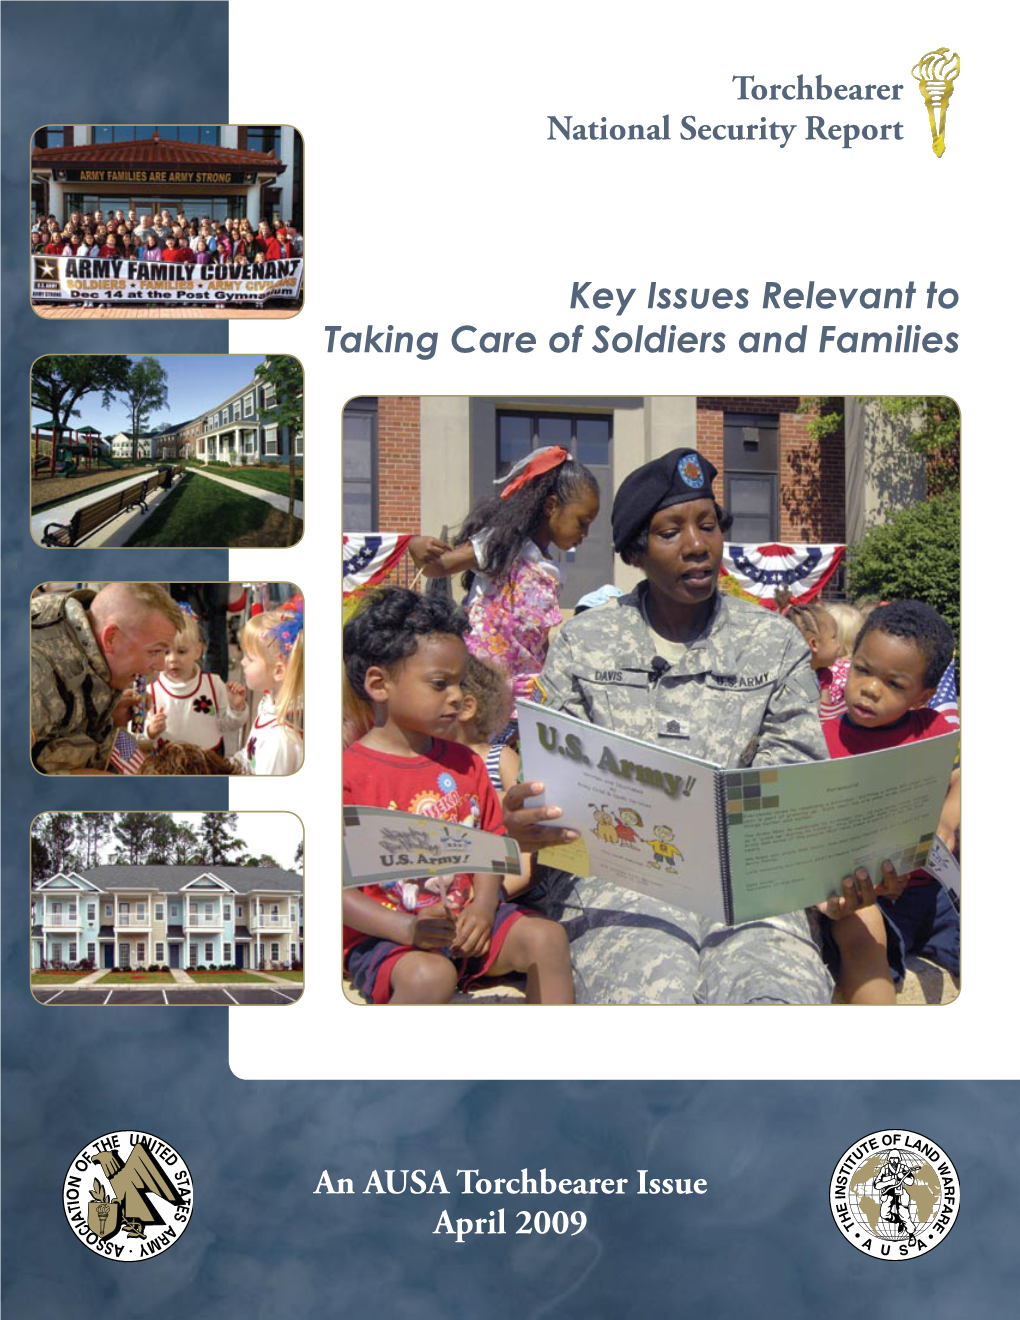 Key Issues Relevant to Taking Care of Soldiers and Families